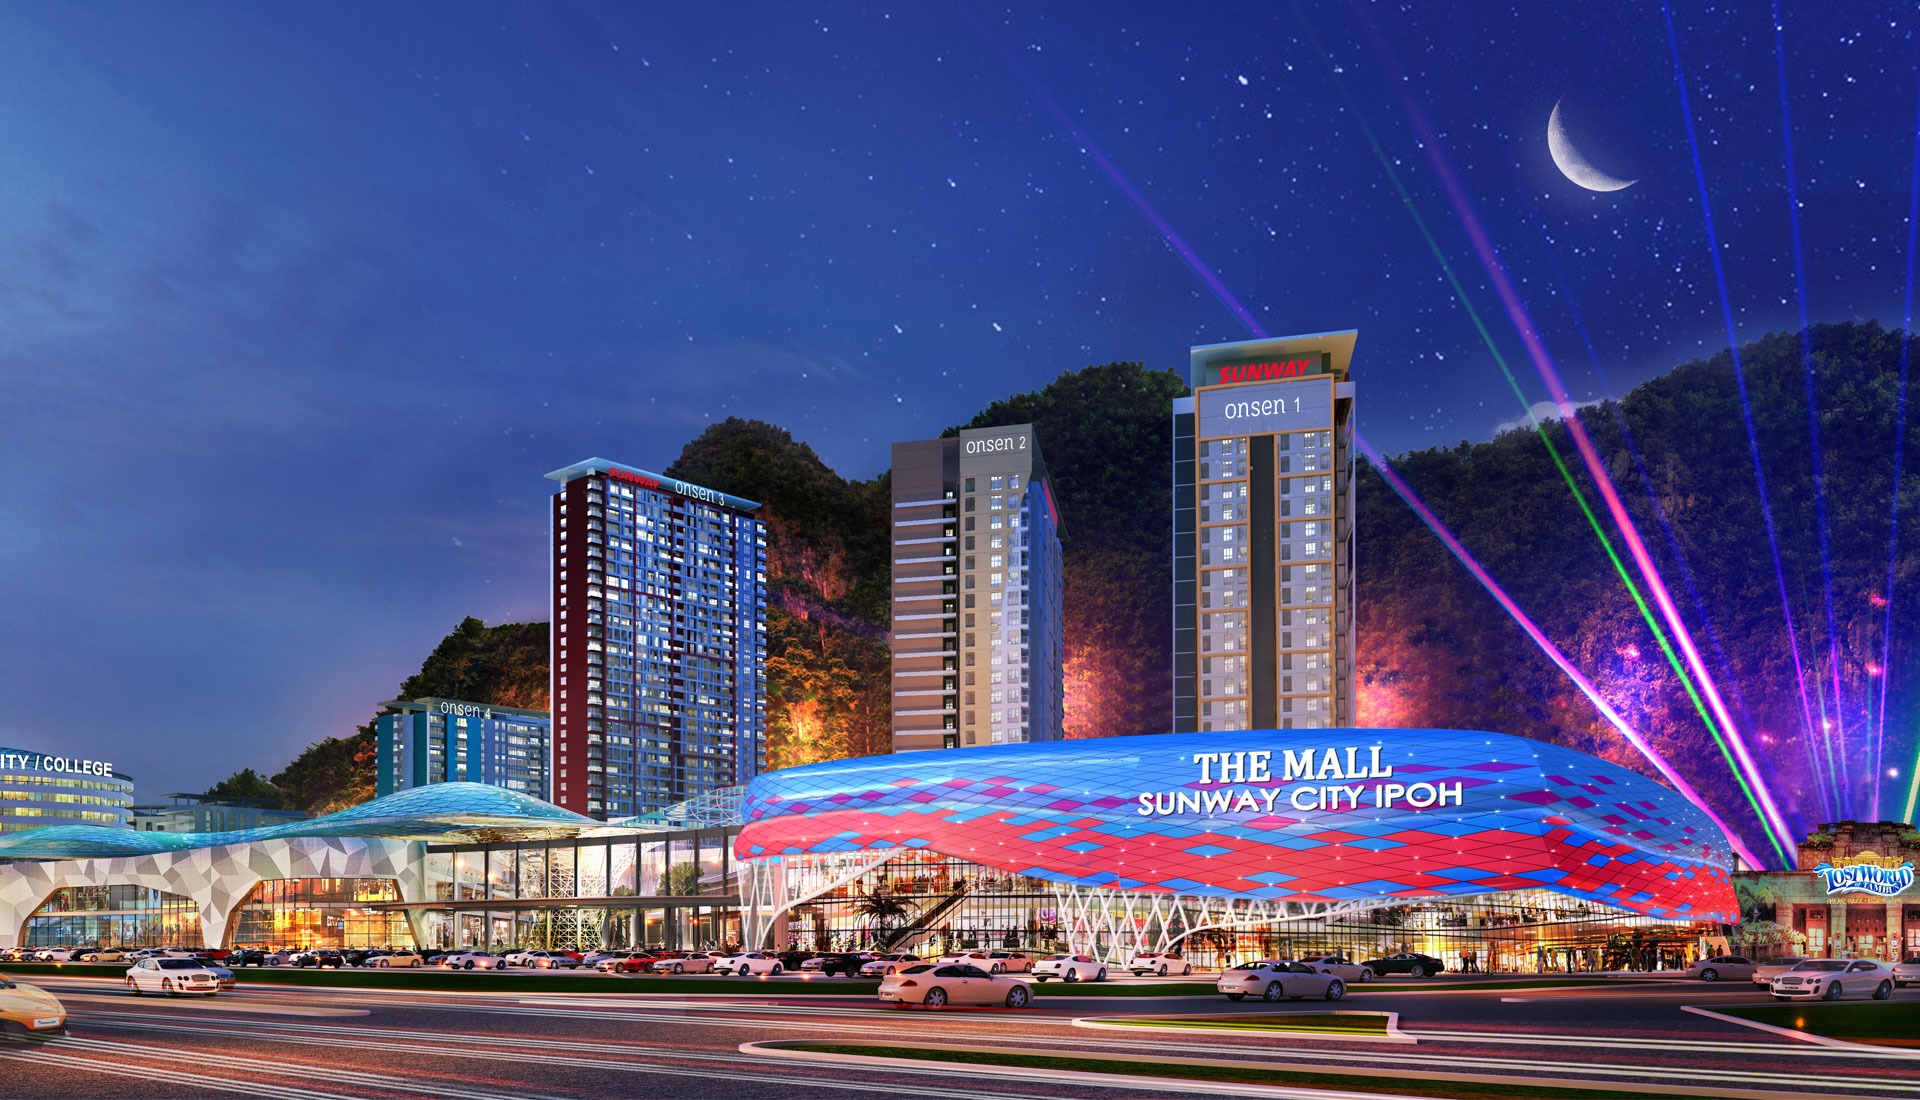 Sunway To Open New Hospital and Mall in Ipoh by 2025